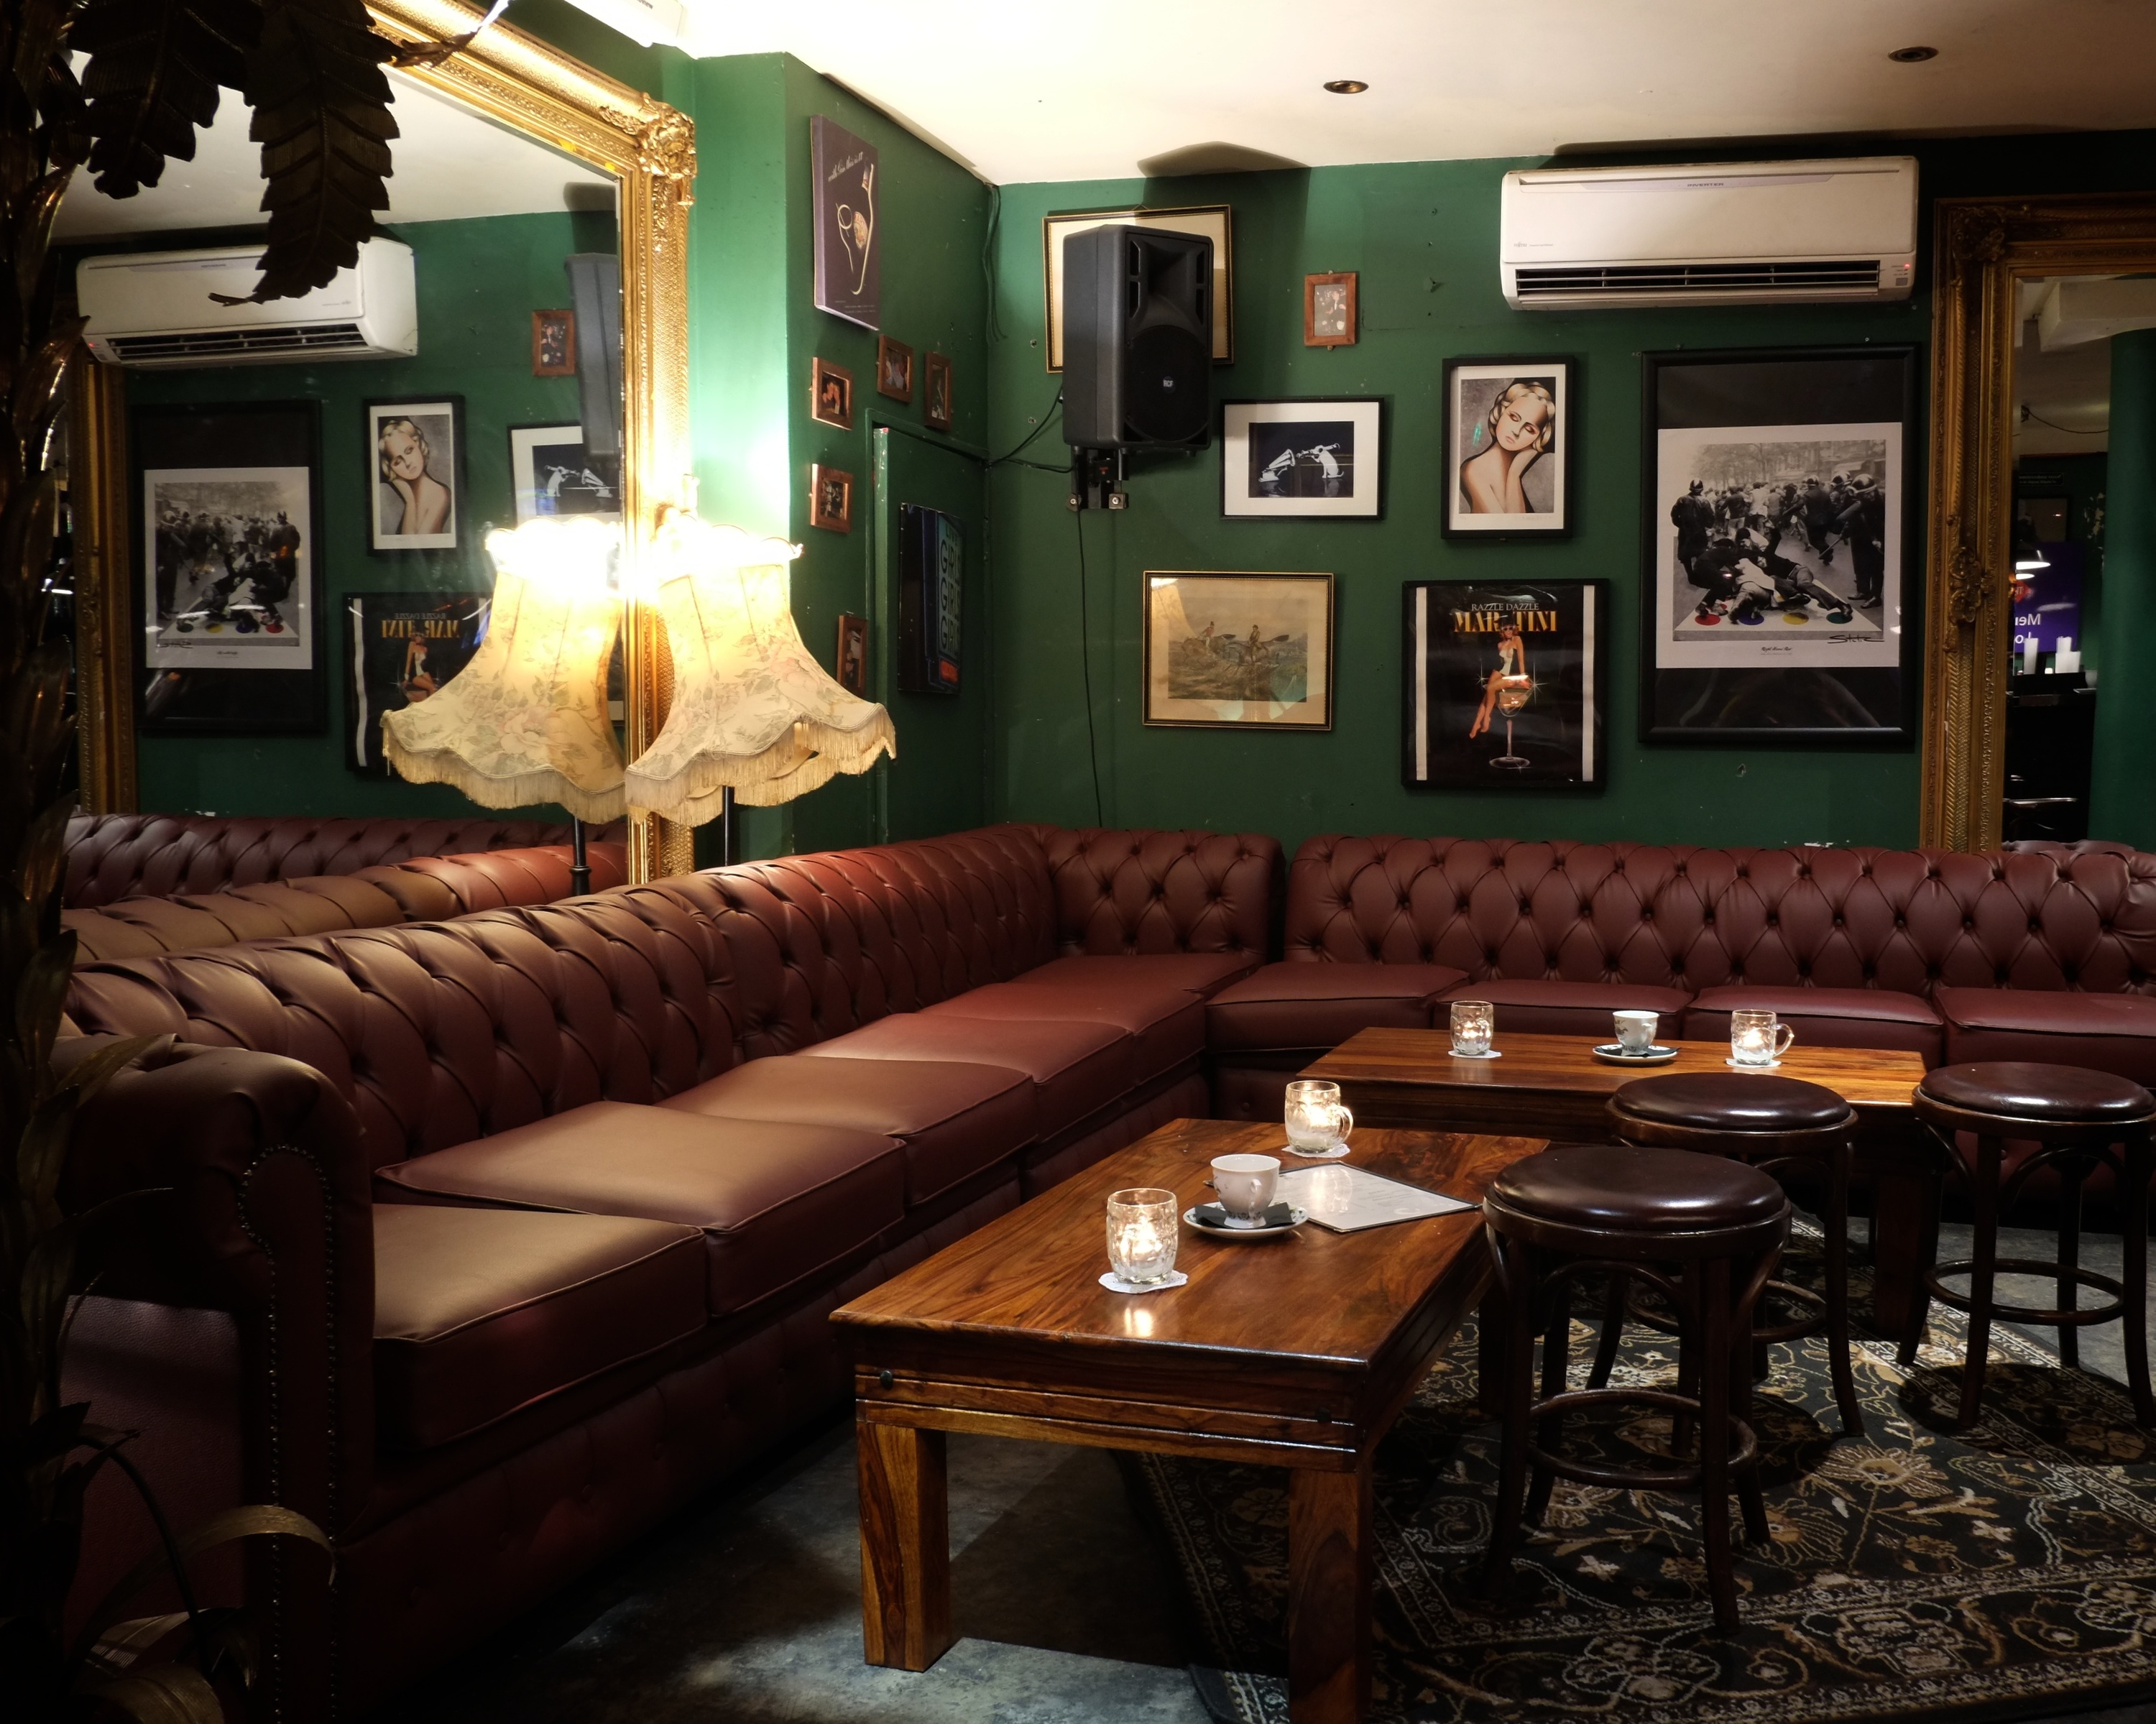 The most-loved bars and pubs in London: where to drink, as recommended